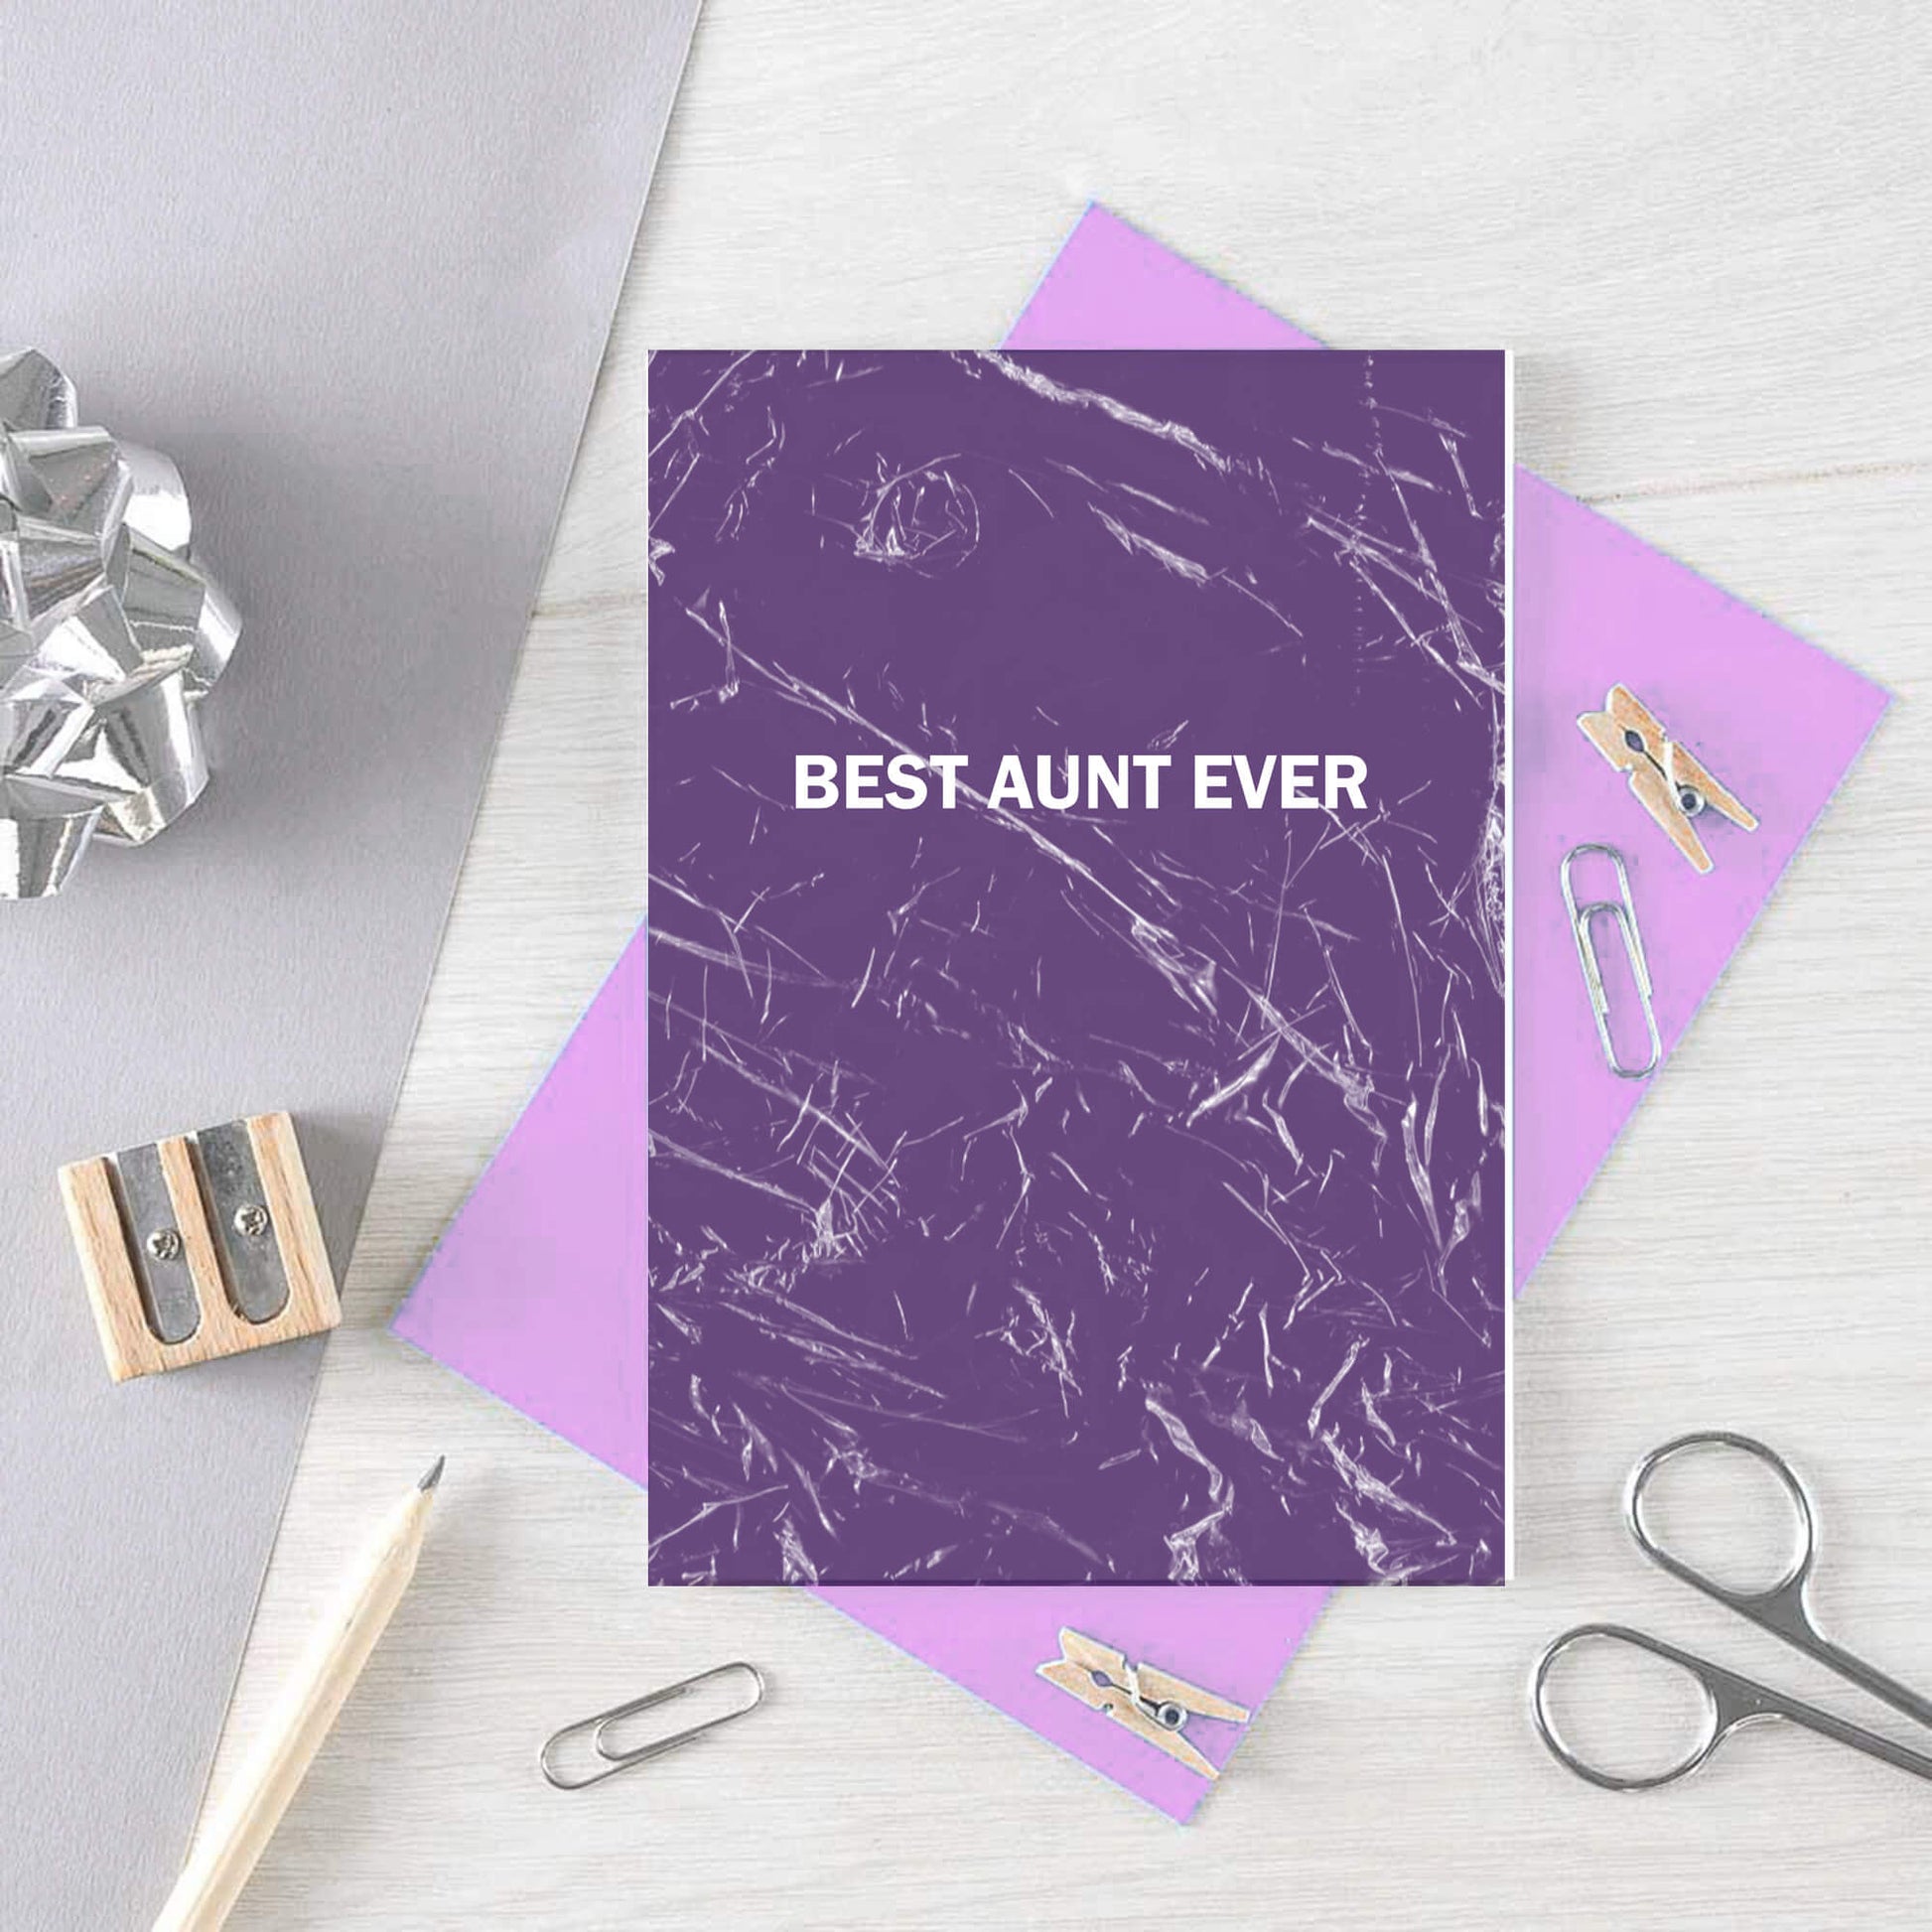 Best Aunt Ever Card by SixElevenCreations. Product Code SE3058A6